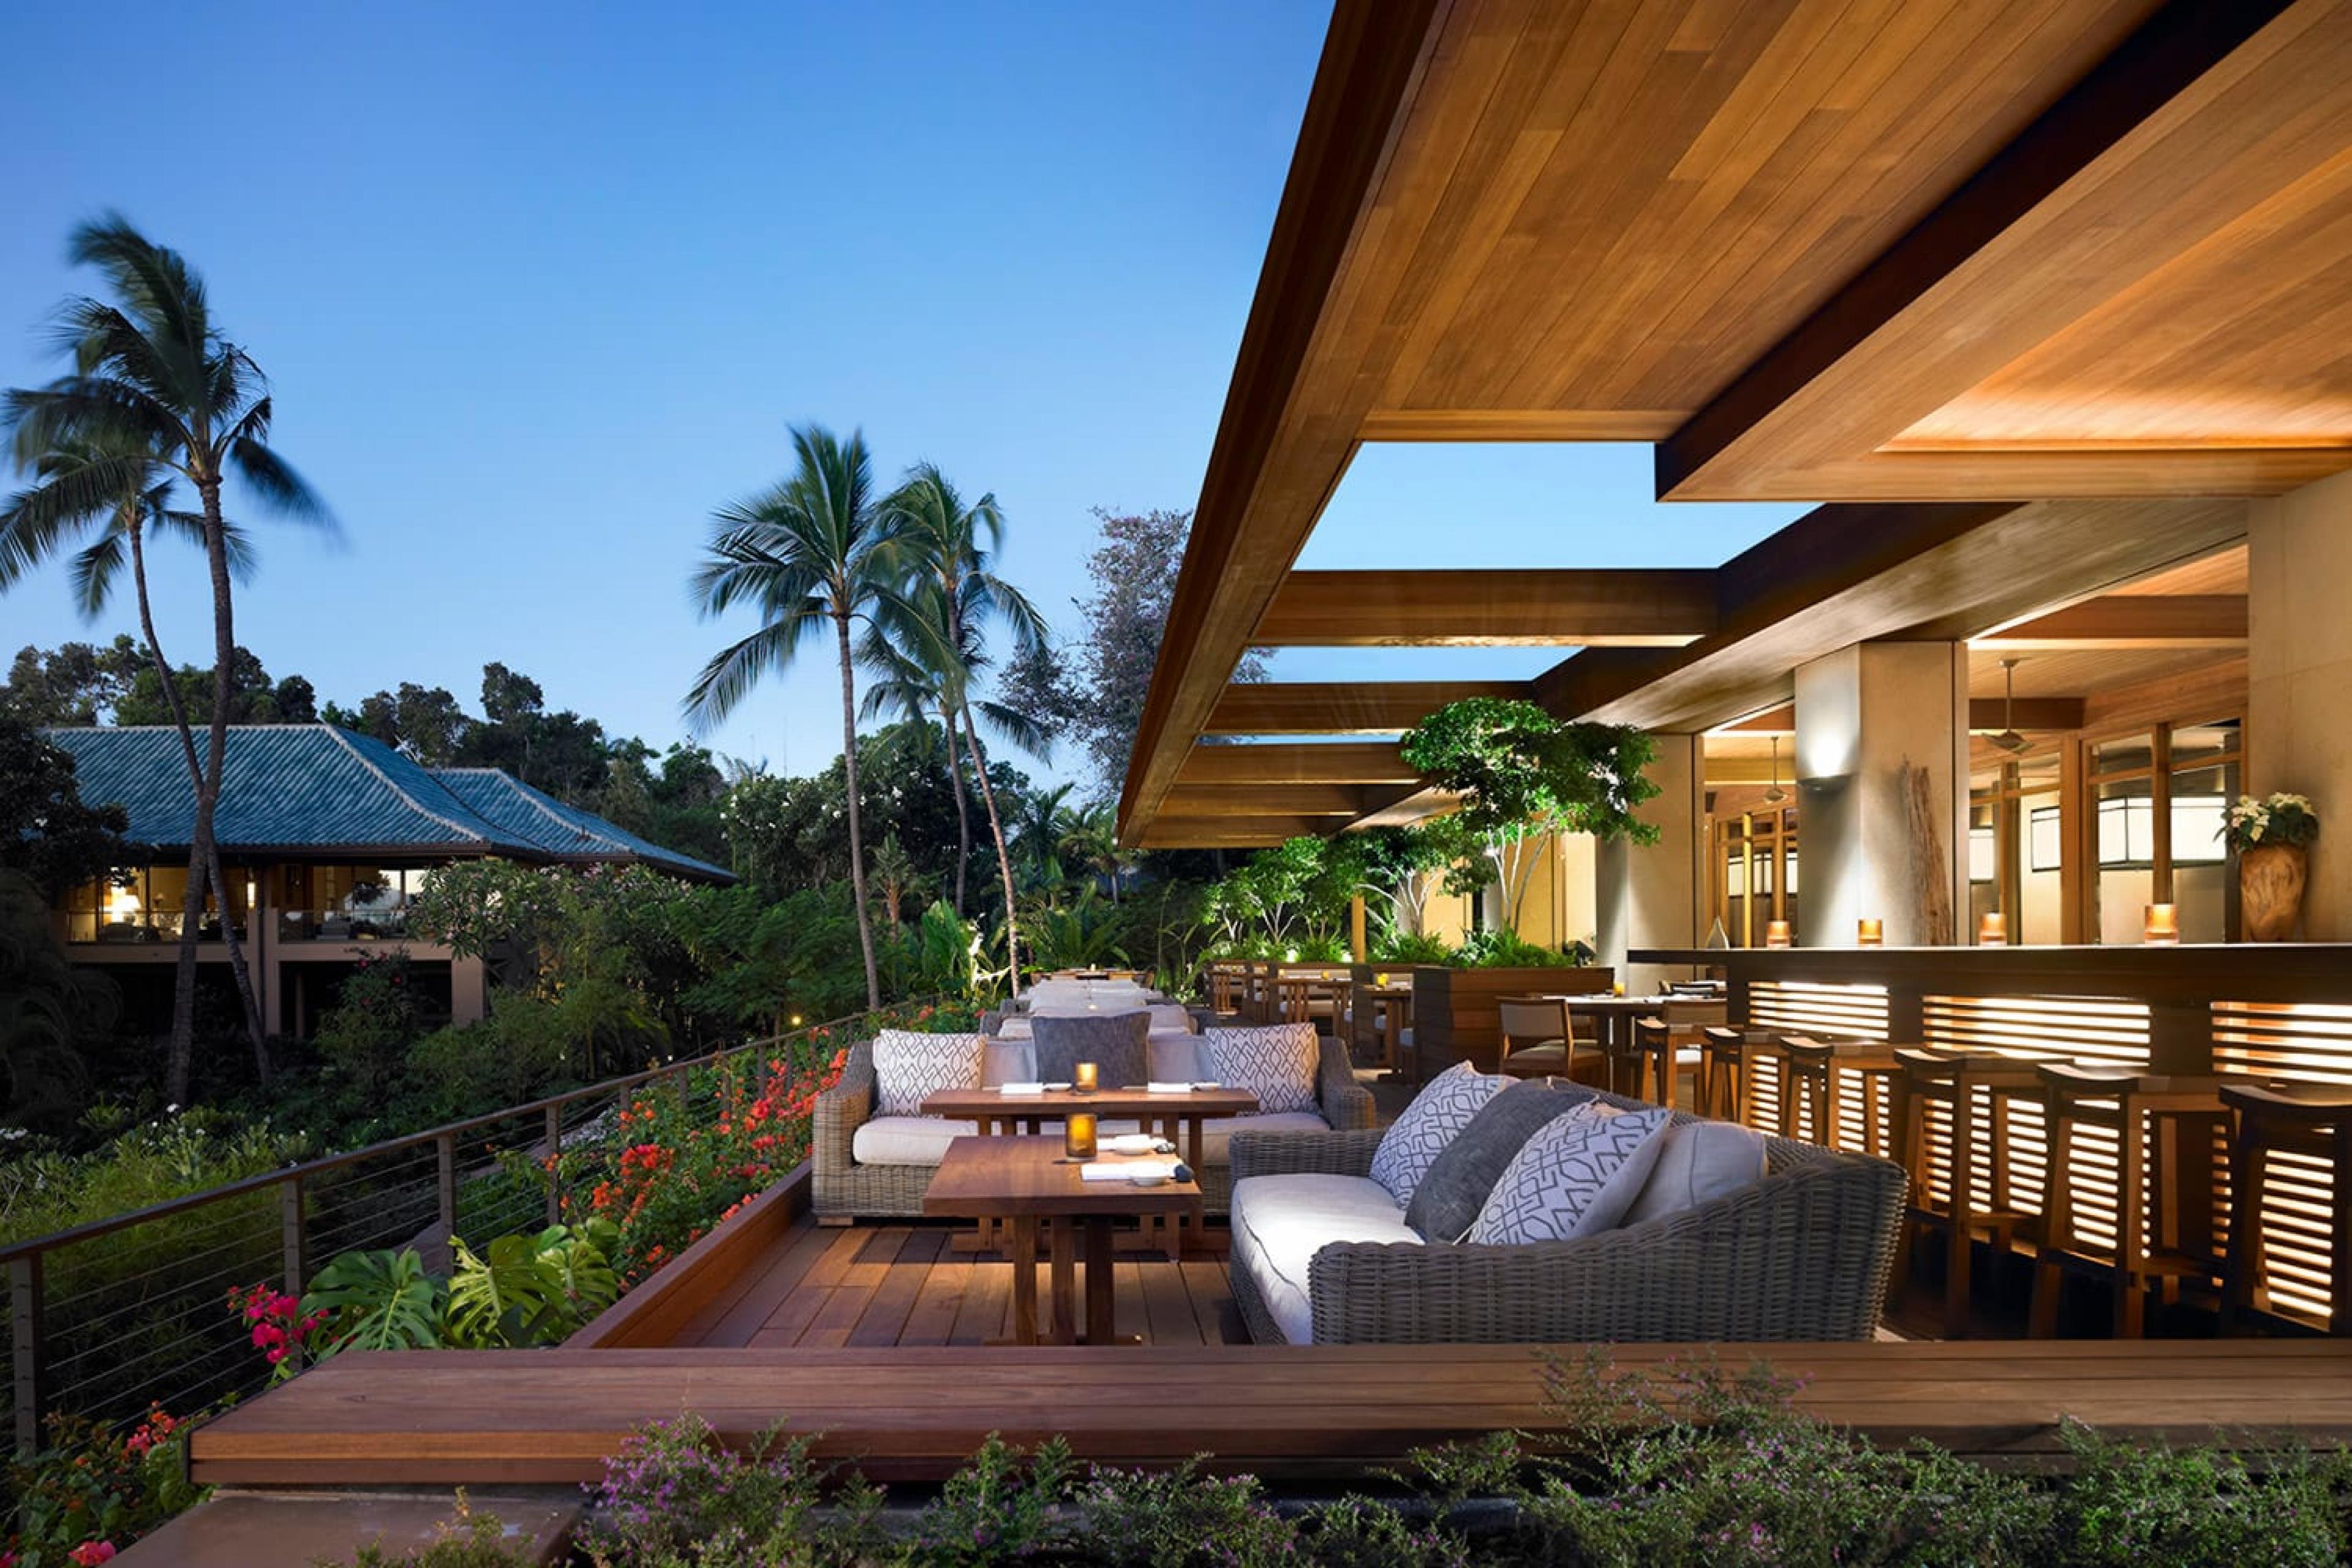 wooden terrace with couch seating at evening time in hawaii with palm trees in background